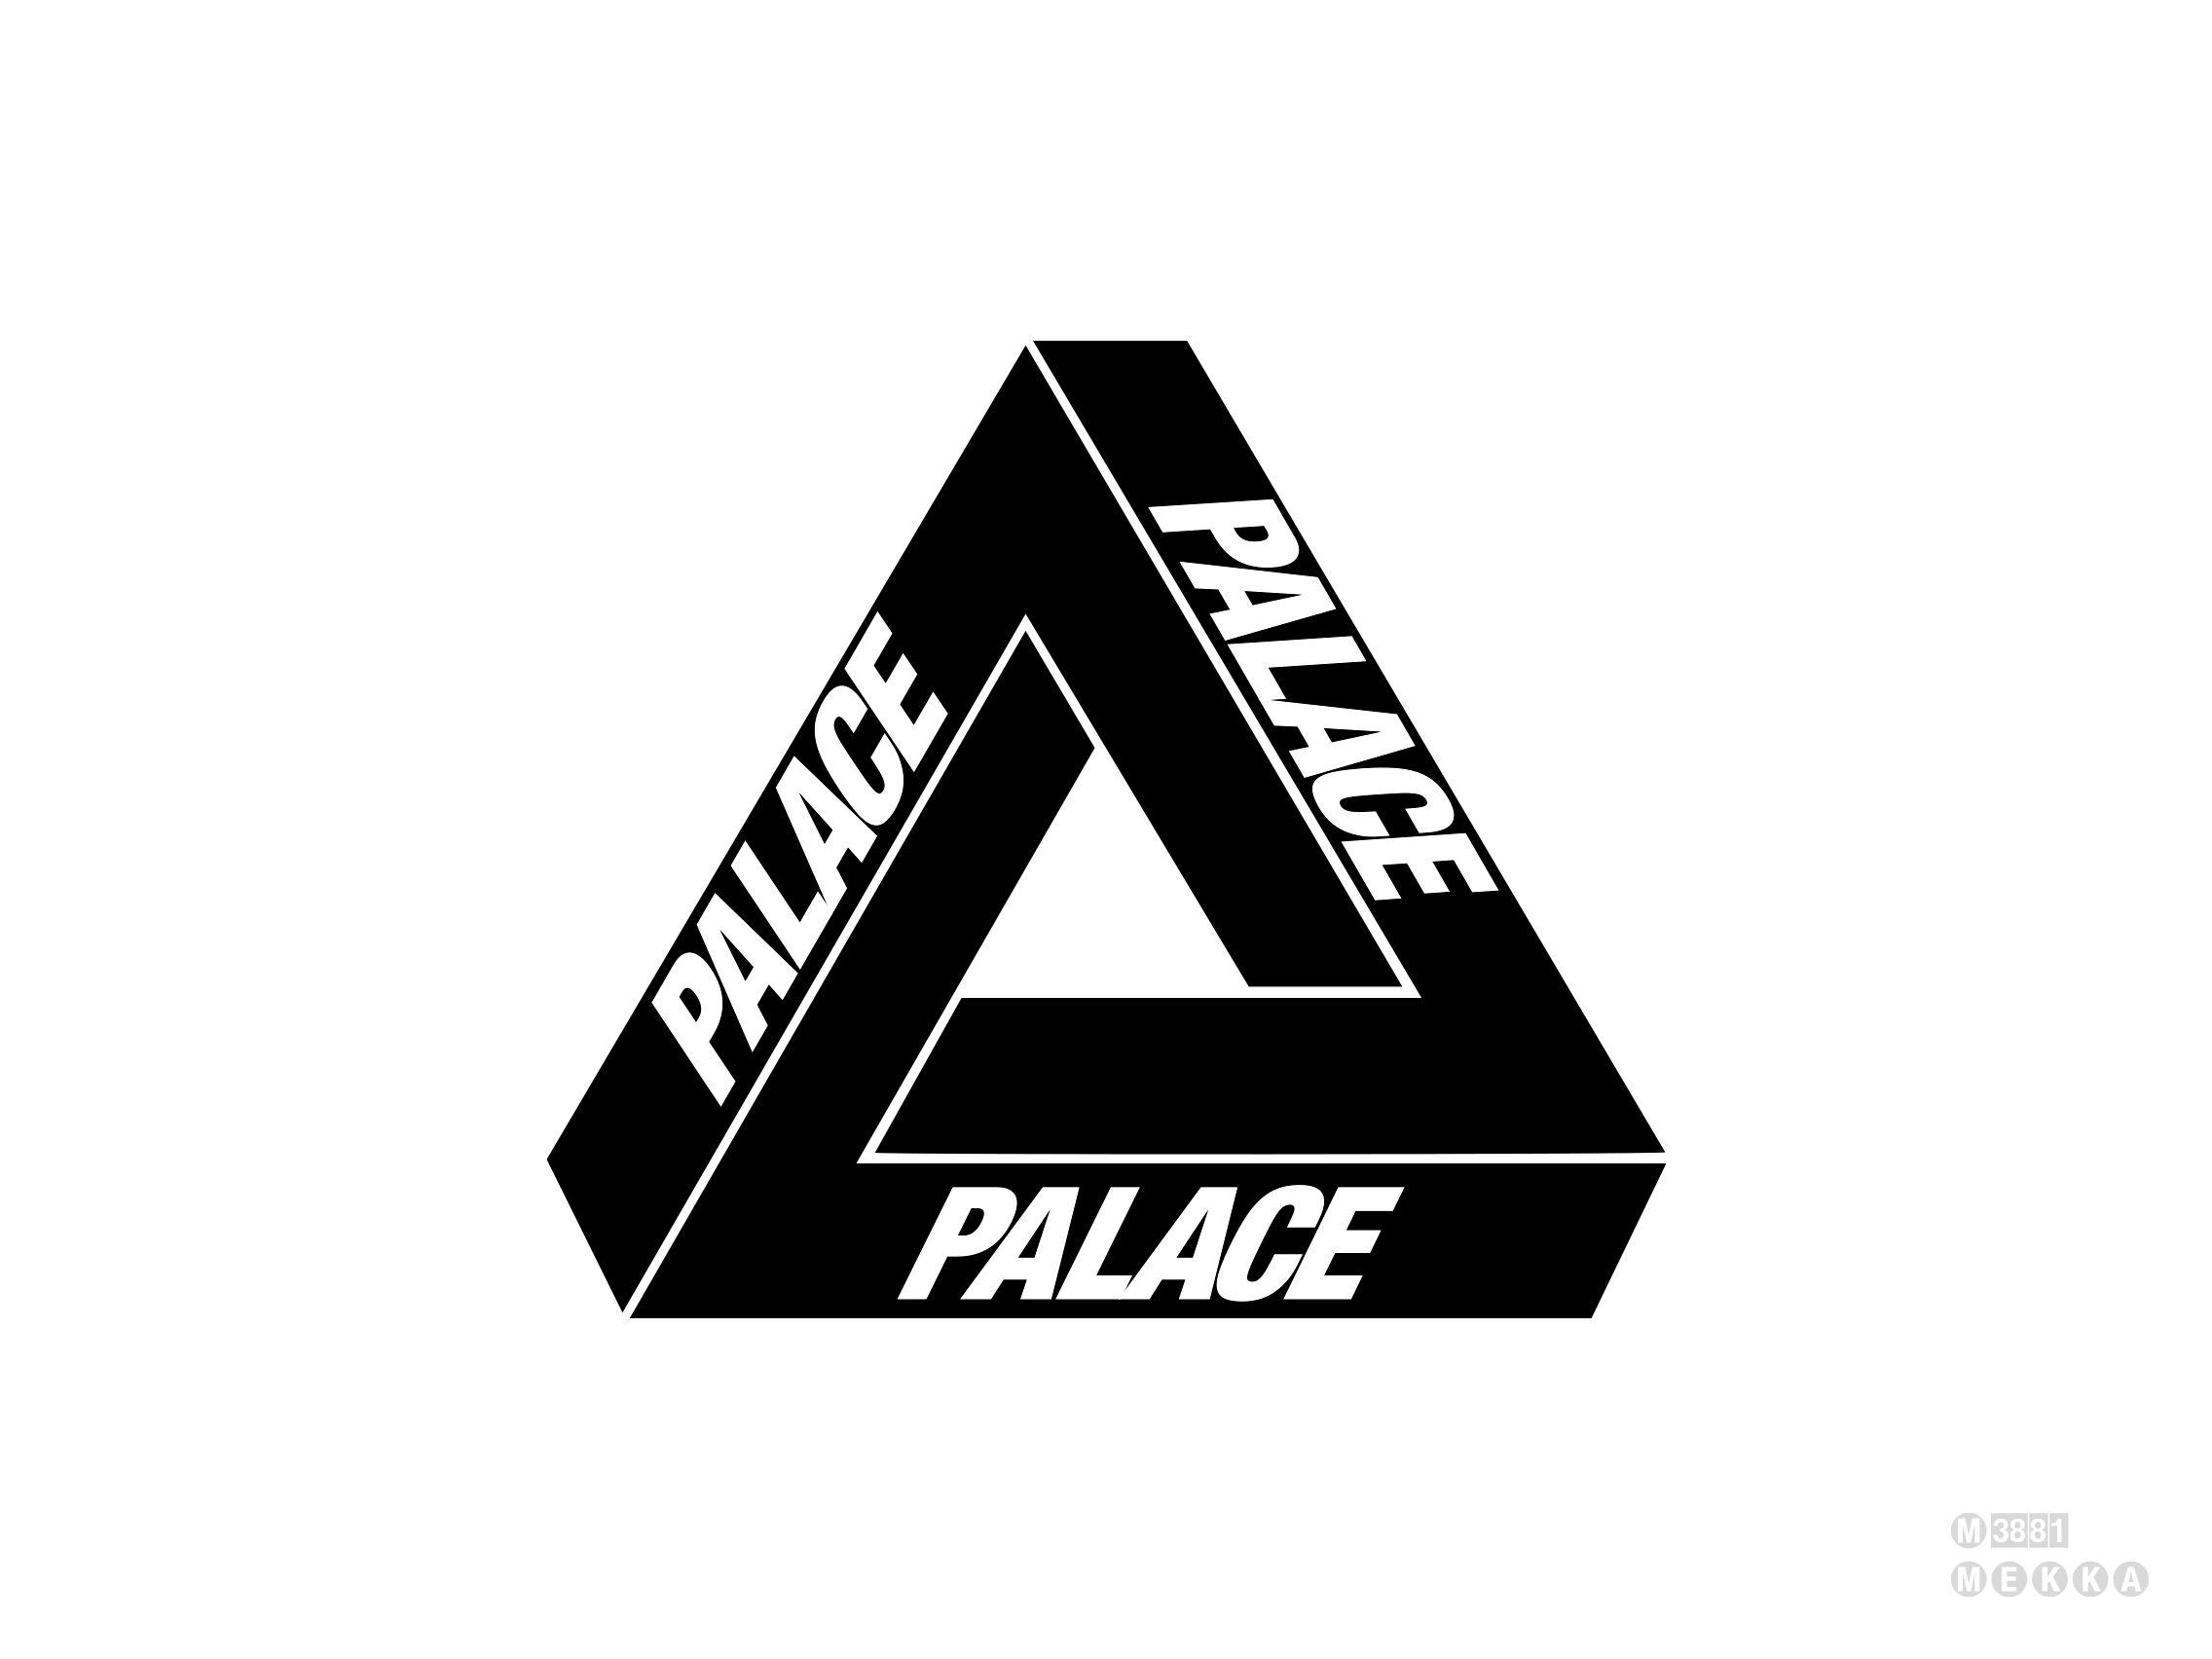 Palace Logo - Palace skateboards Vector (black and White please) : vectorartrequests